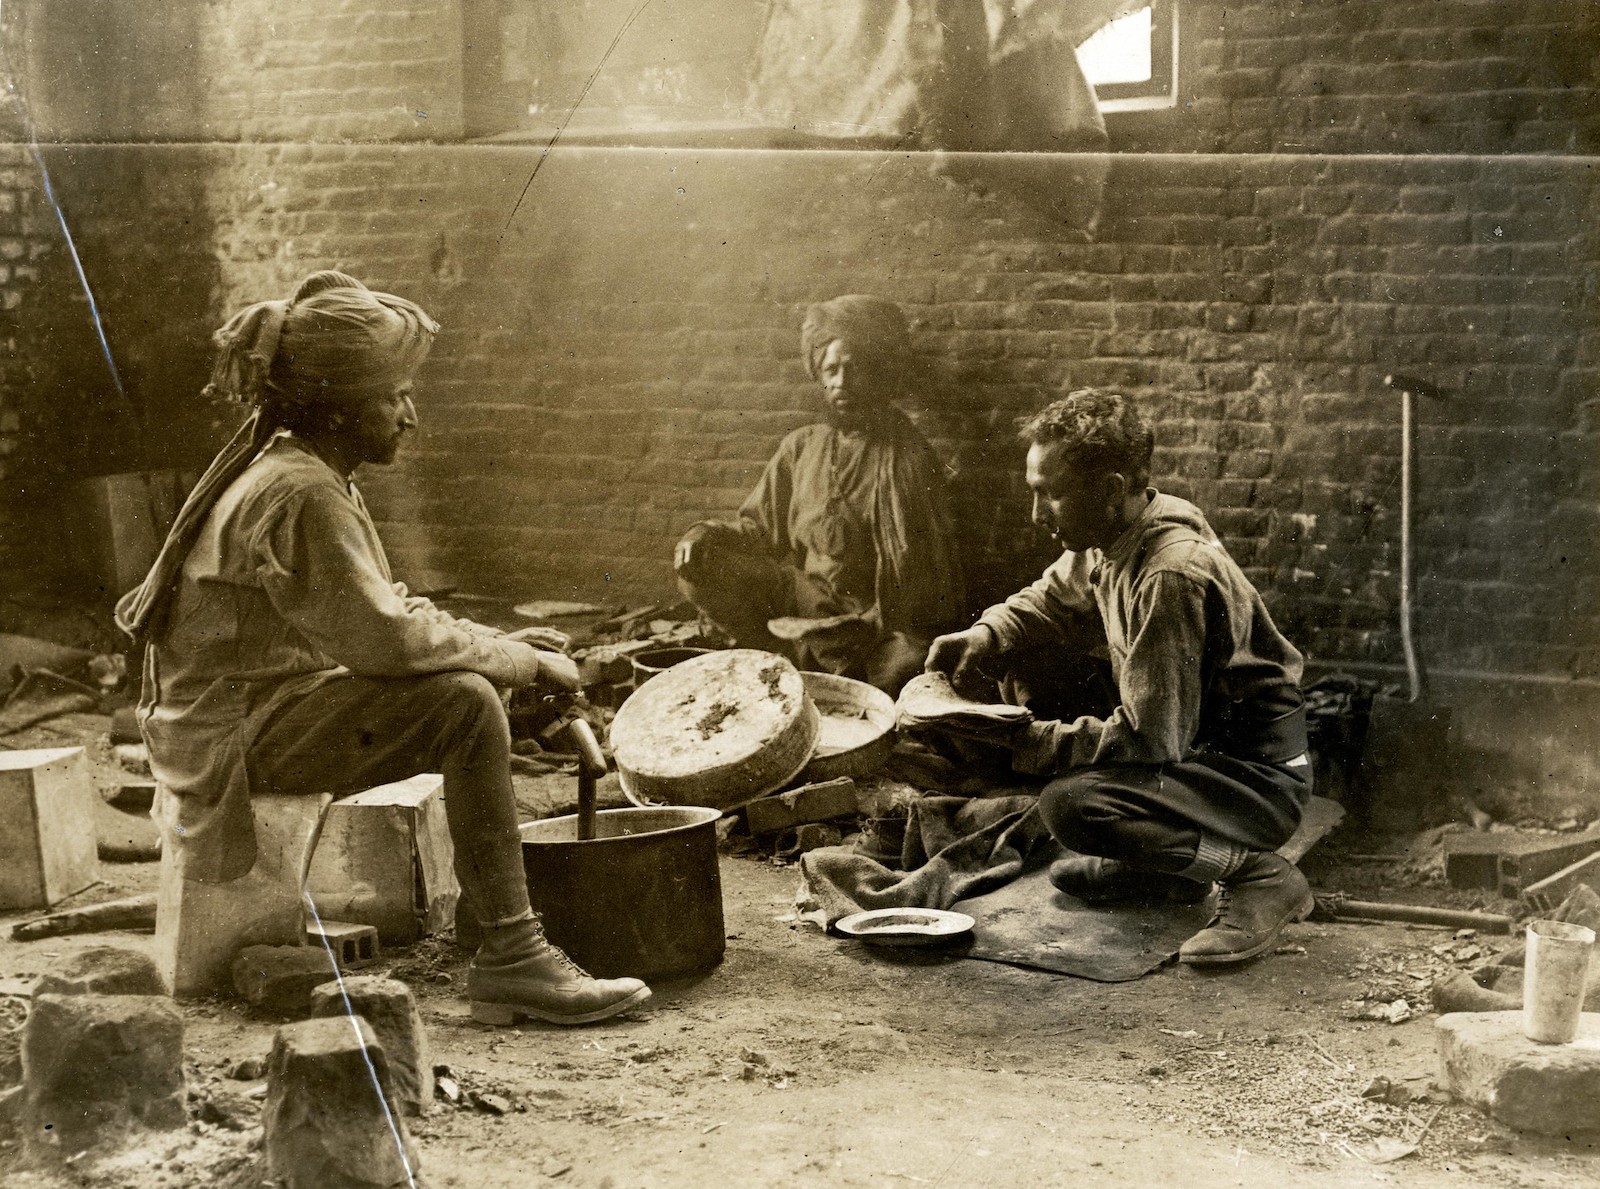 Indian cavalry troopers preparing a meal in Estrée Blanche, France, 25 July 1915. British Library. Public Domain.